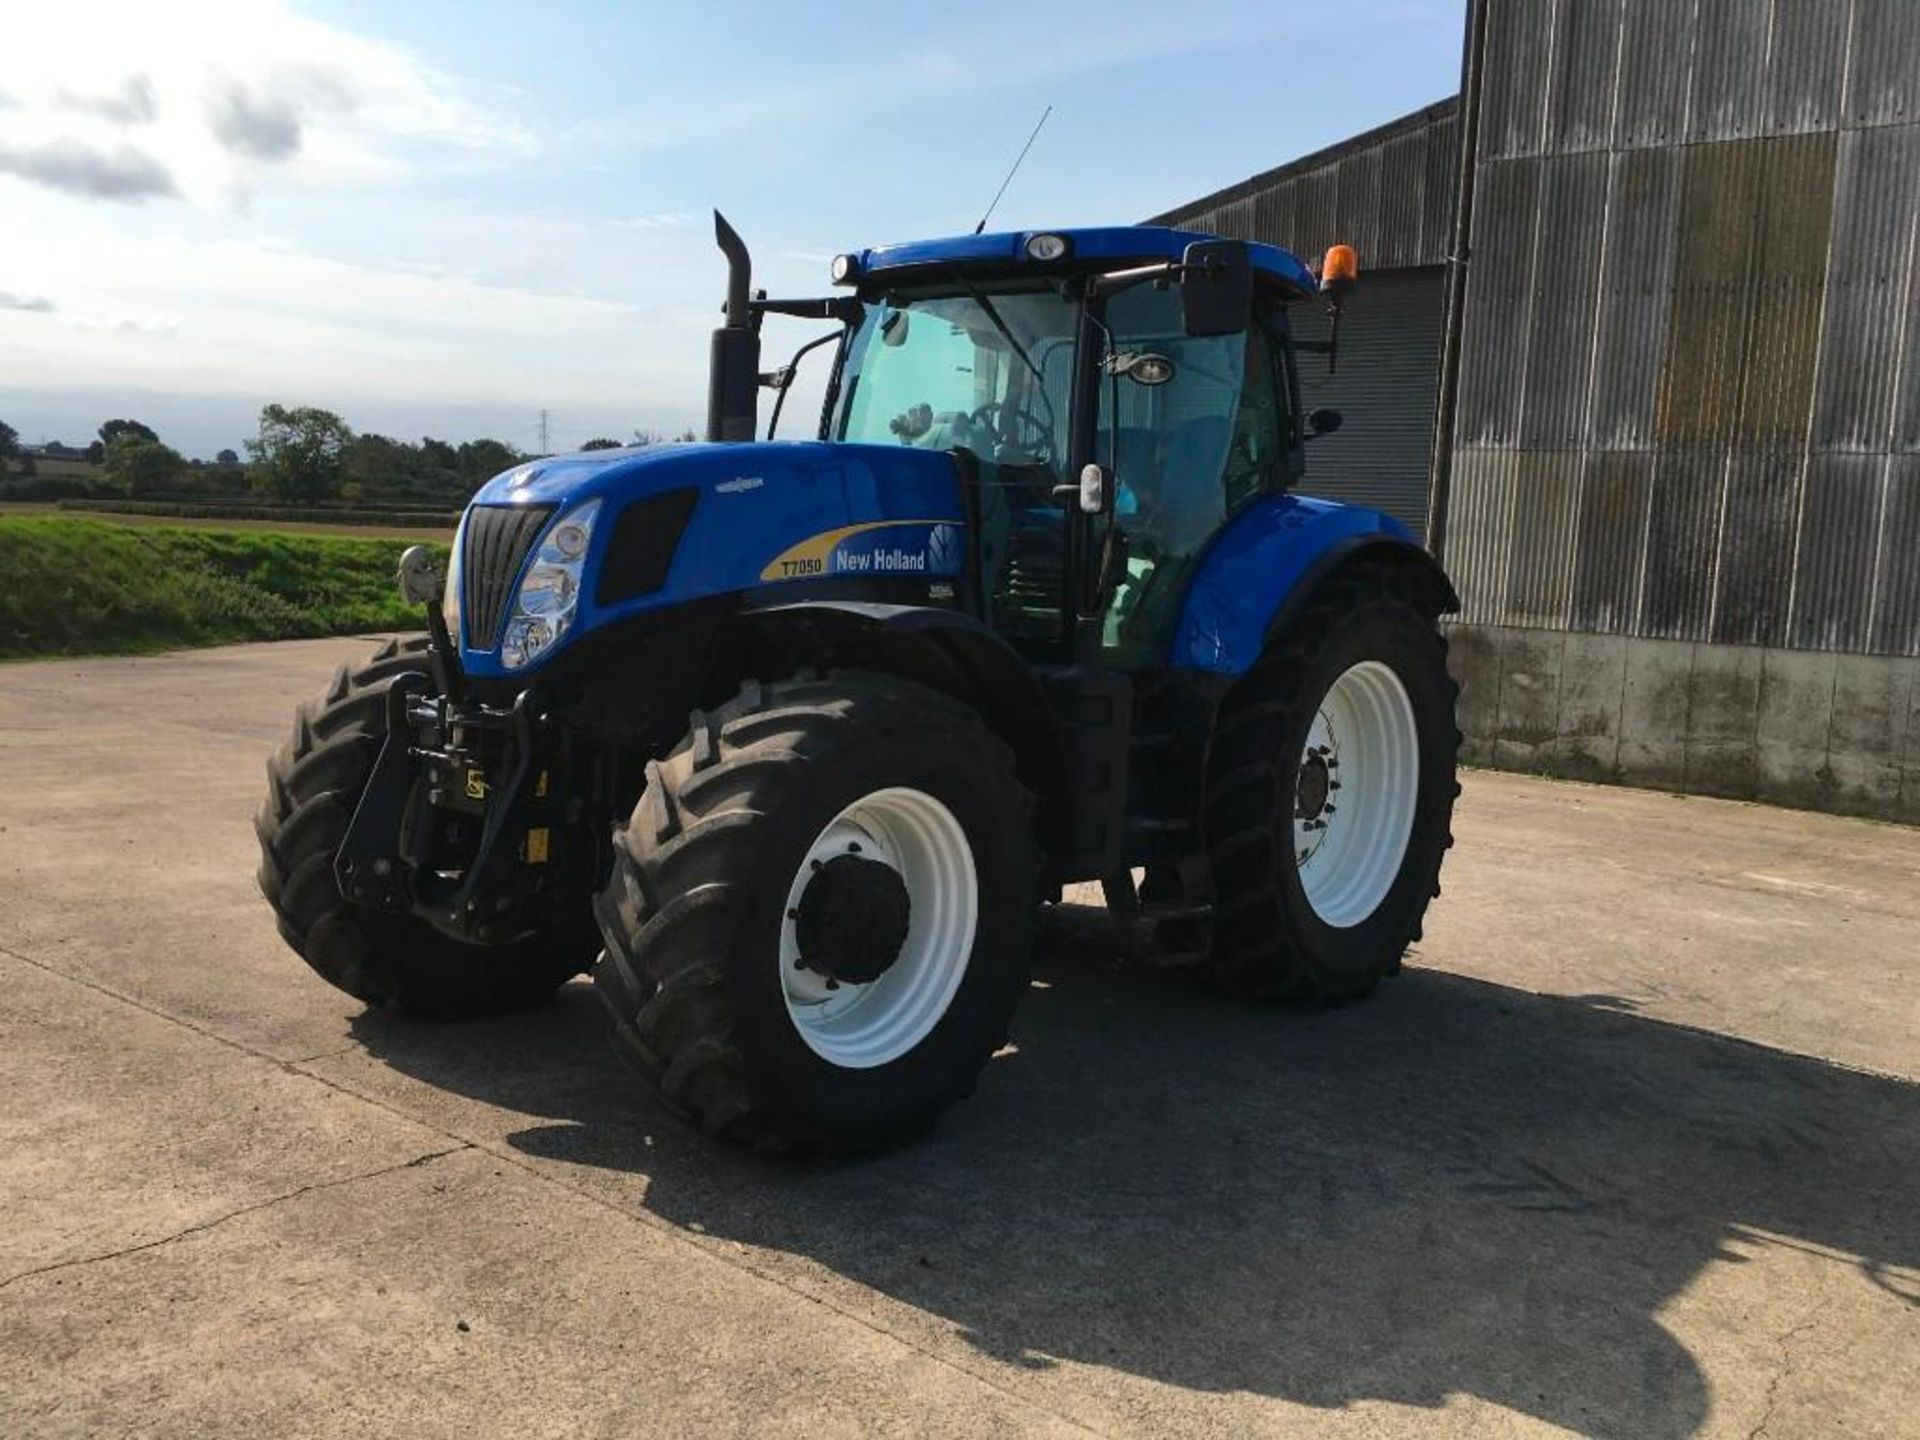 2011 New Holland T7050 Auto Command 4wd tractor with air brakes, front linkage, air seat, - Image 7 of 15